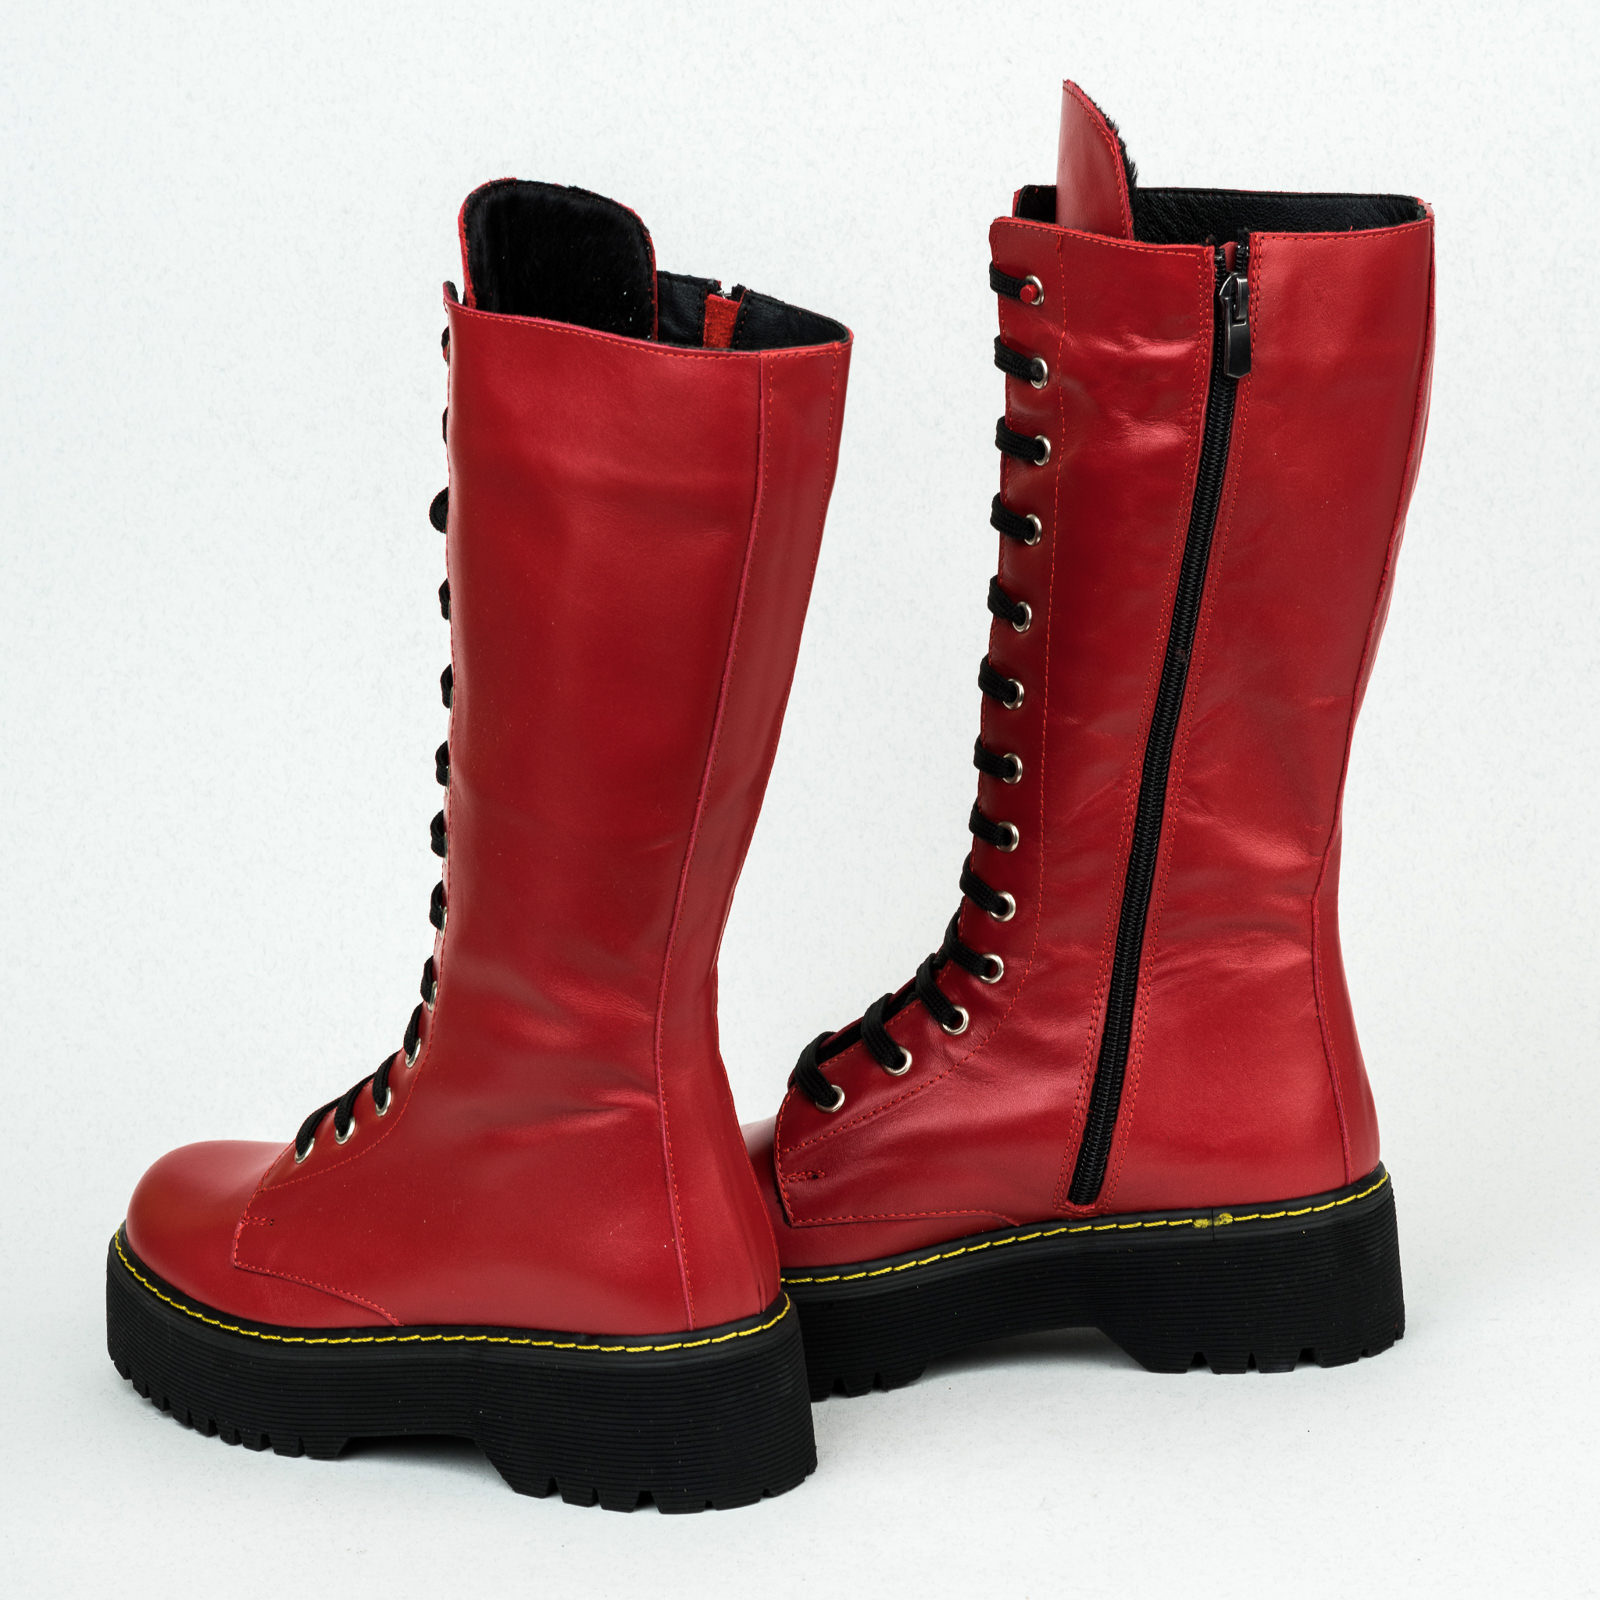 Leather WATERPROOF boots B151 - RED